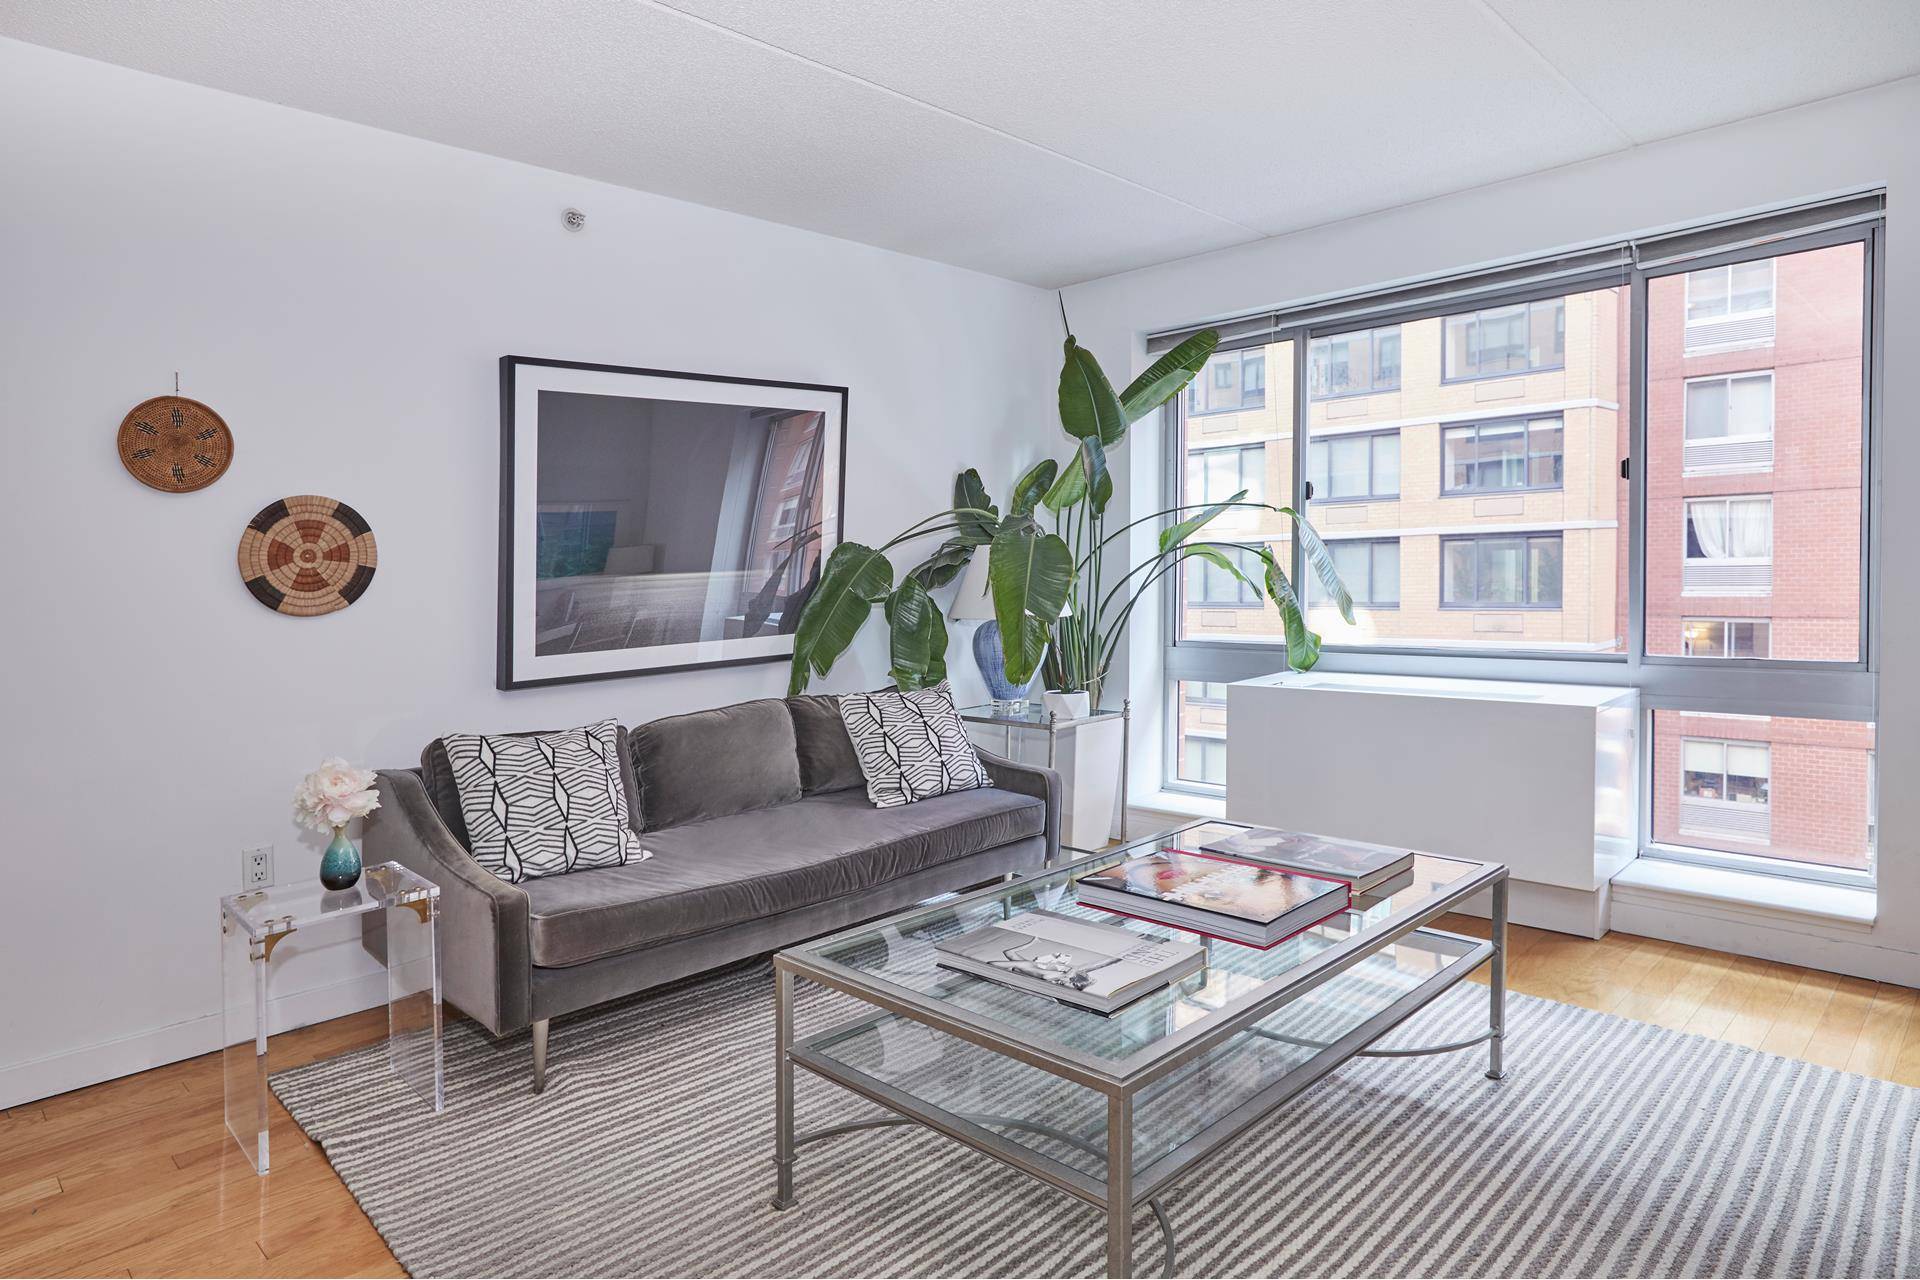 Welcome to this wonderful one bedroom in excellent condition now available at one of the most coveted buildings in the West Chelsea gallery district.